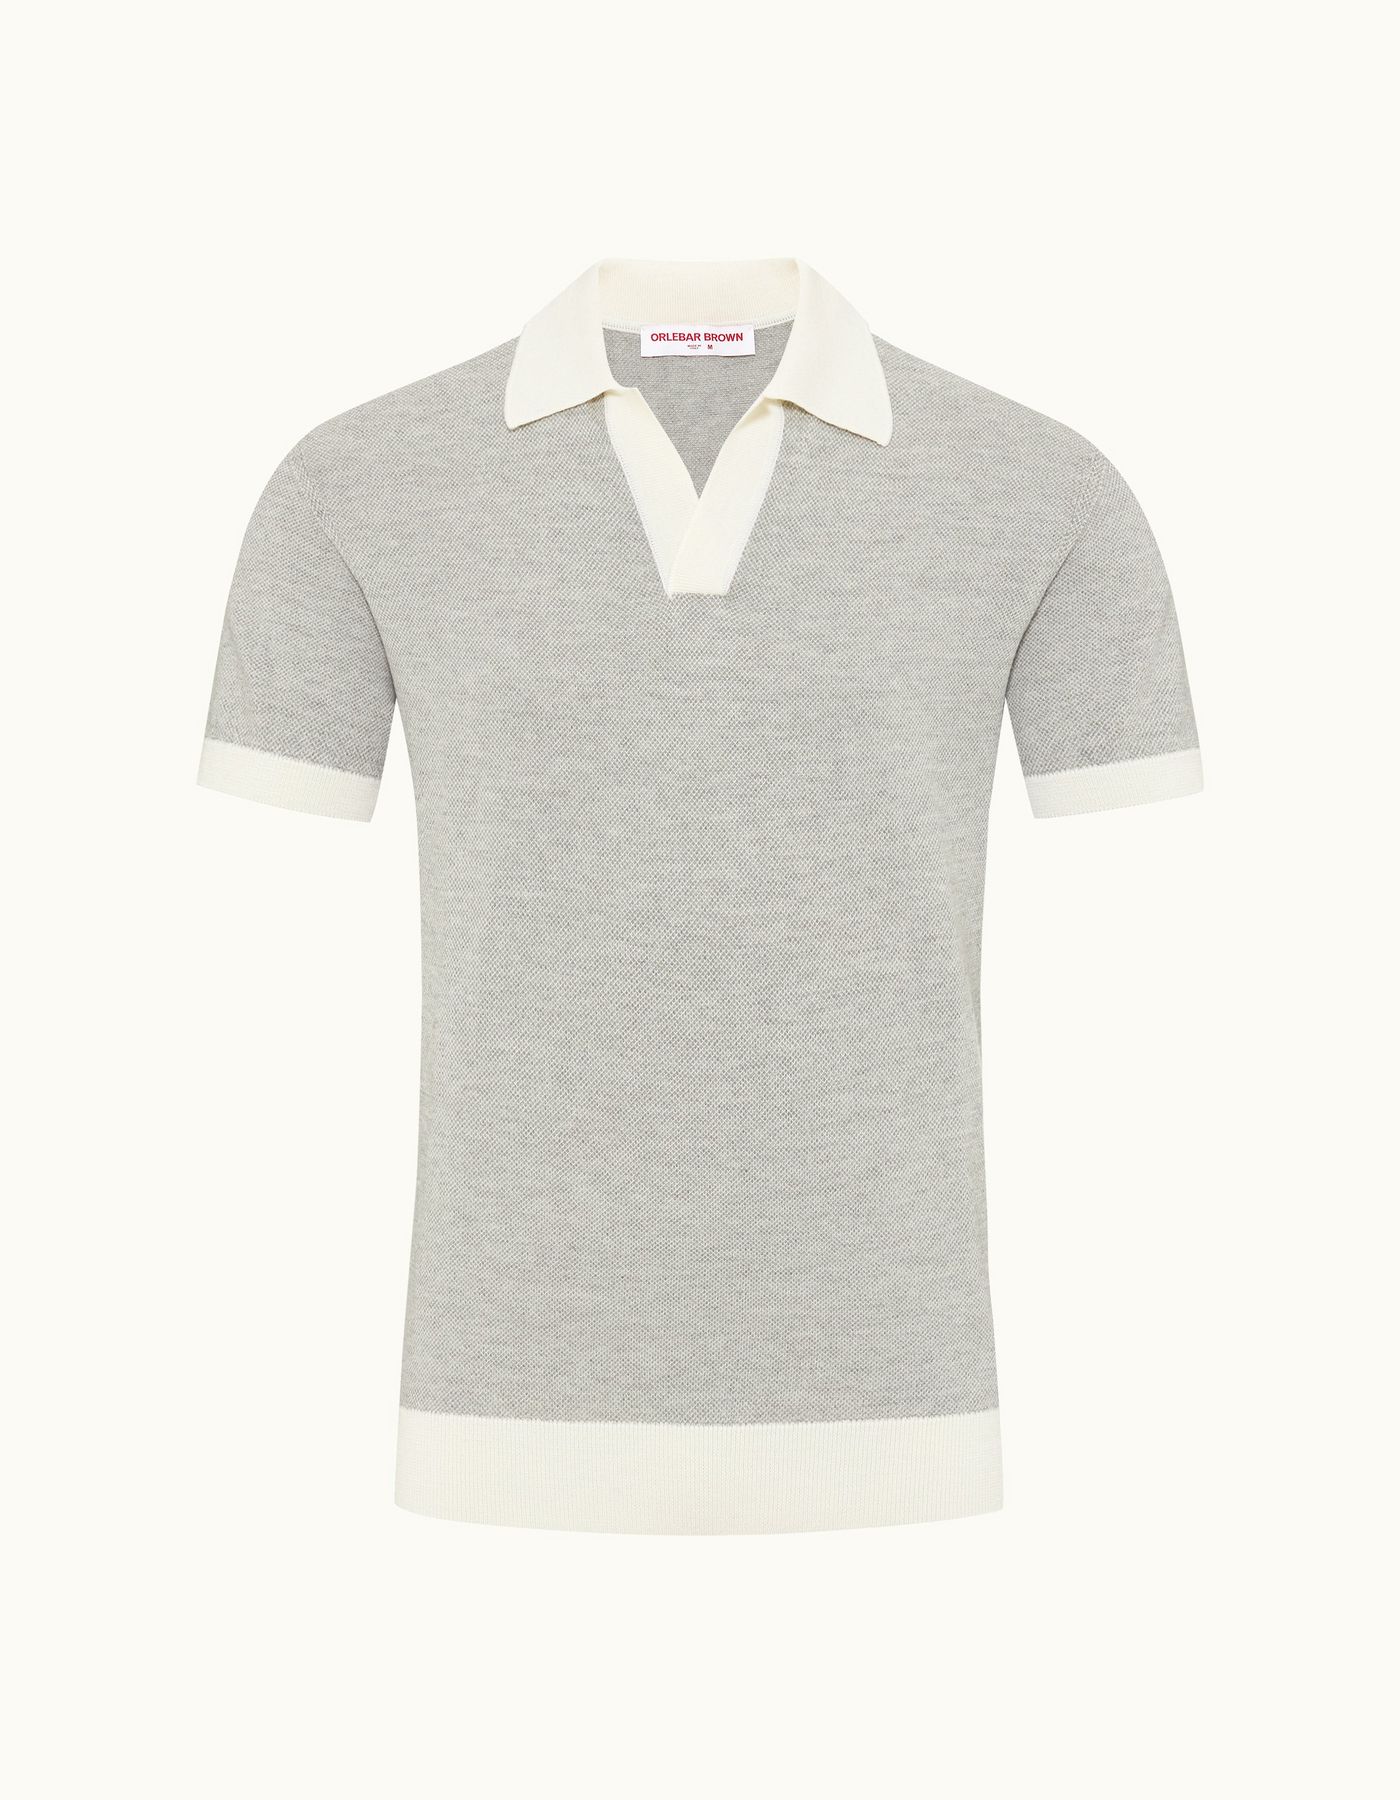 Horton - Mens Marl Tailored Fit Contrast Texture Merino Polo Shirt In White Sand/Grey